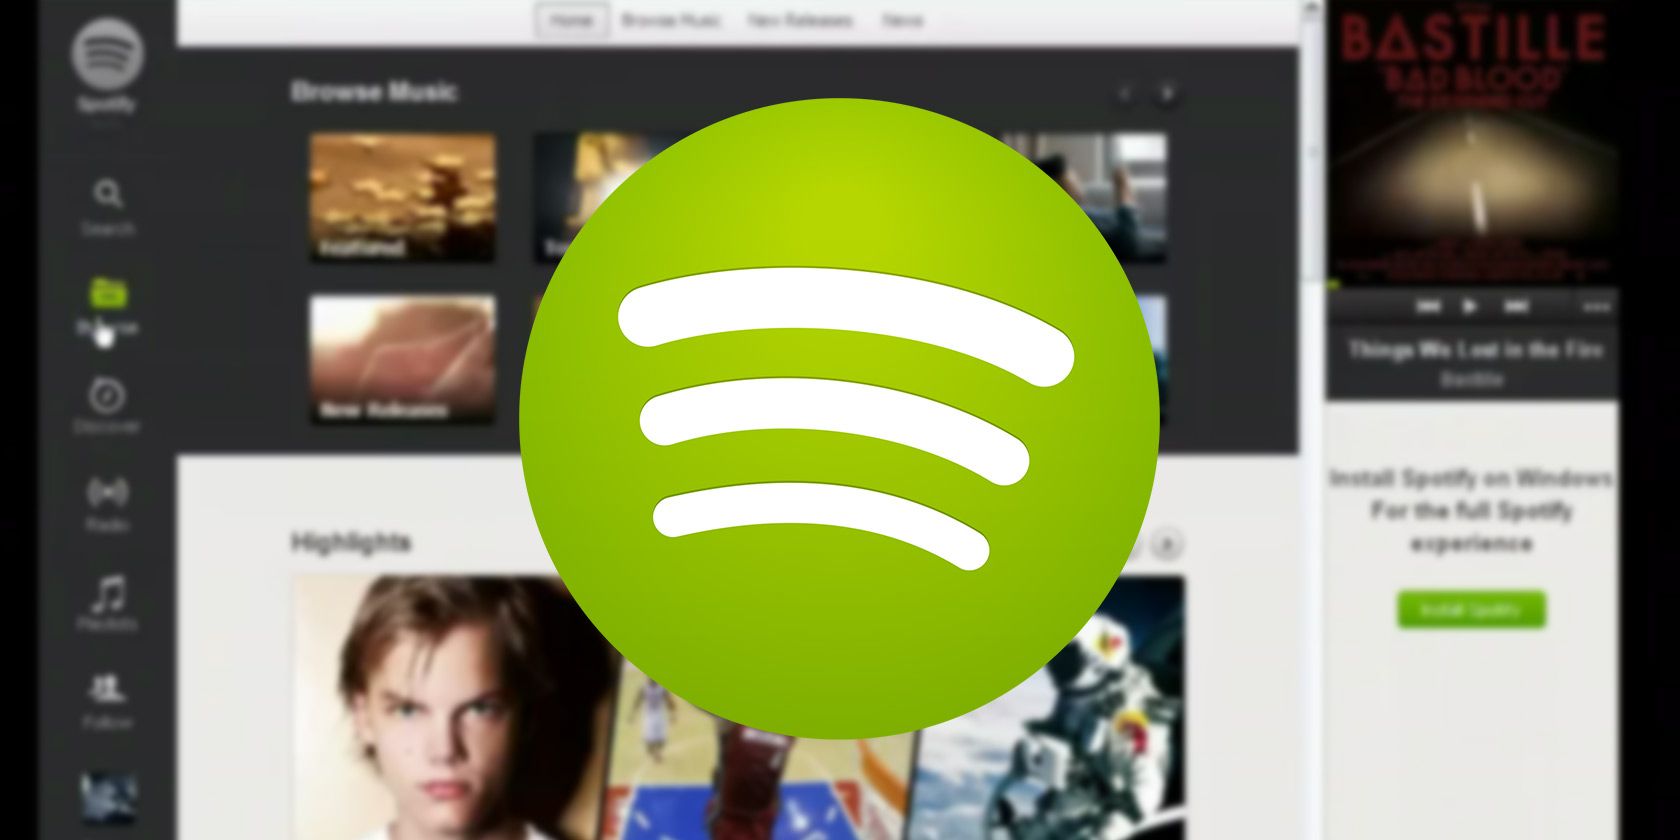 Spotify - Web Player: Music for everyone